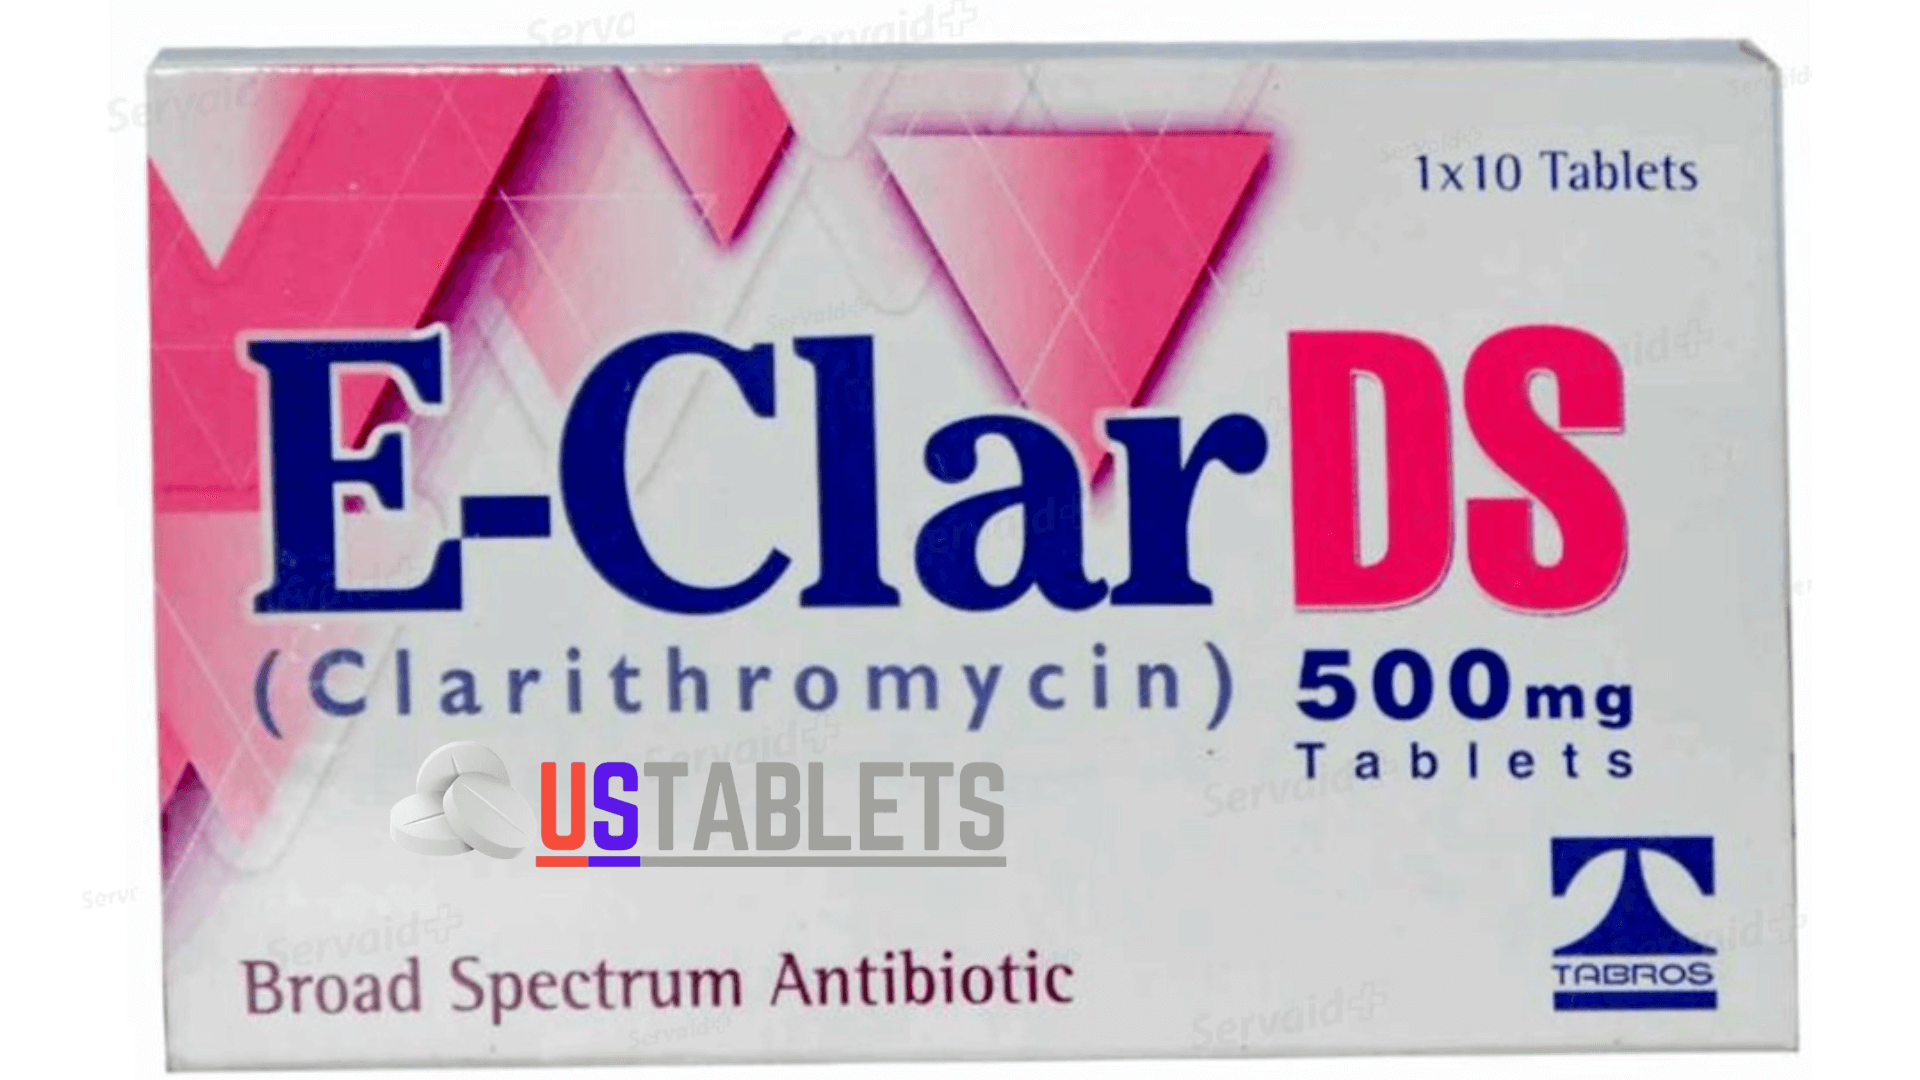 E-Clar Ds Tablets 500mg I Uses, Side Effects, Price & Availability